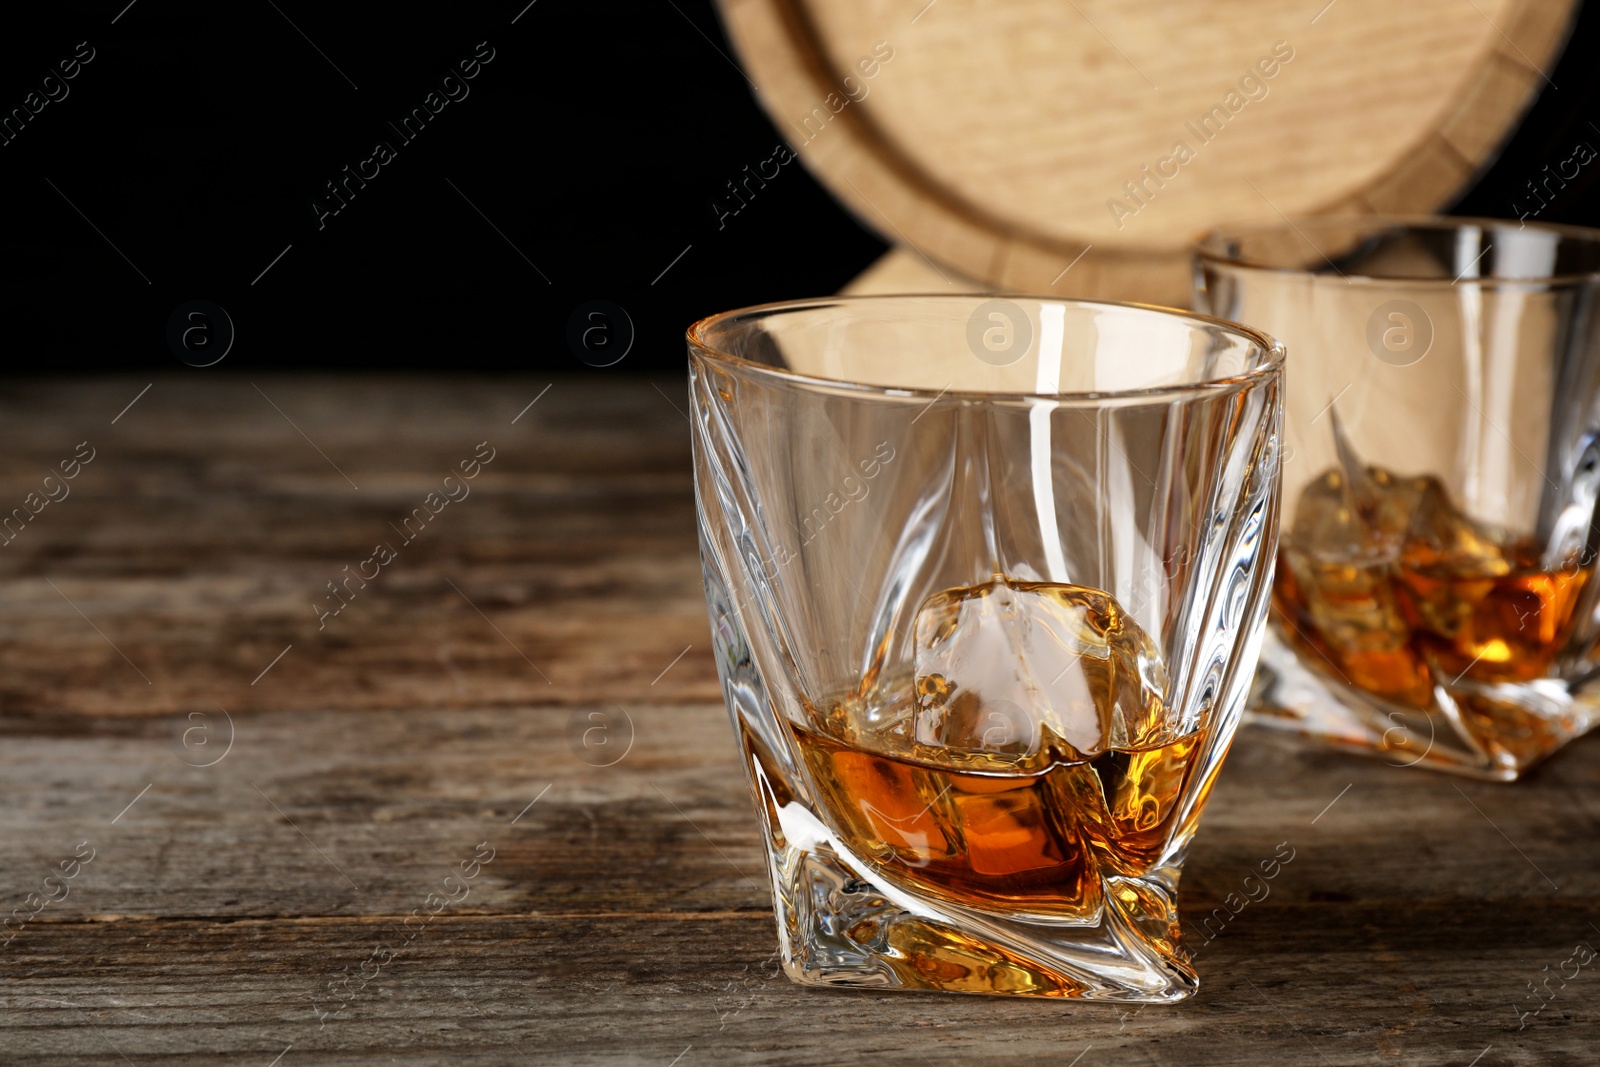 Photo of Golden whiskey in glass with ice cube on wooden table